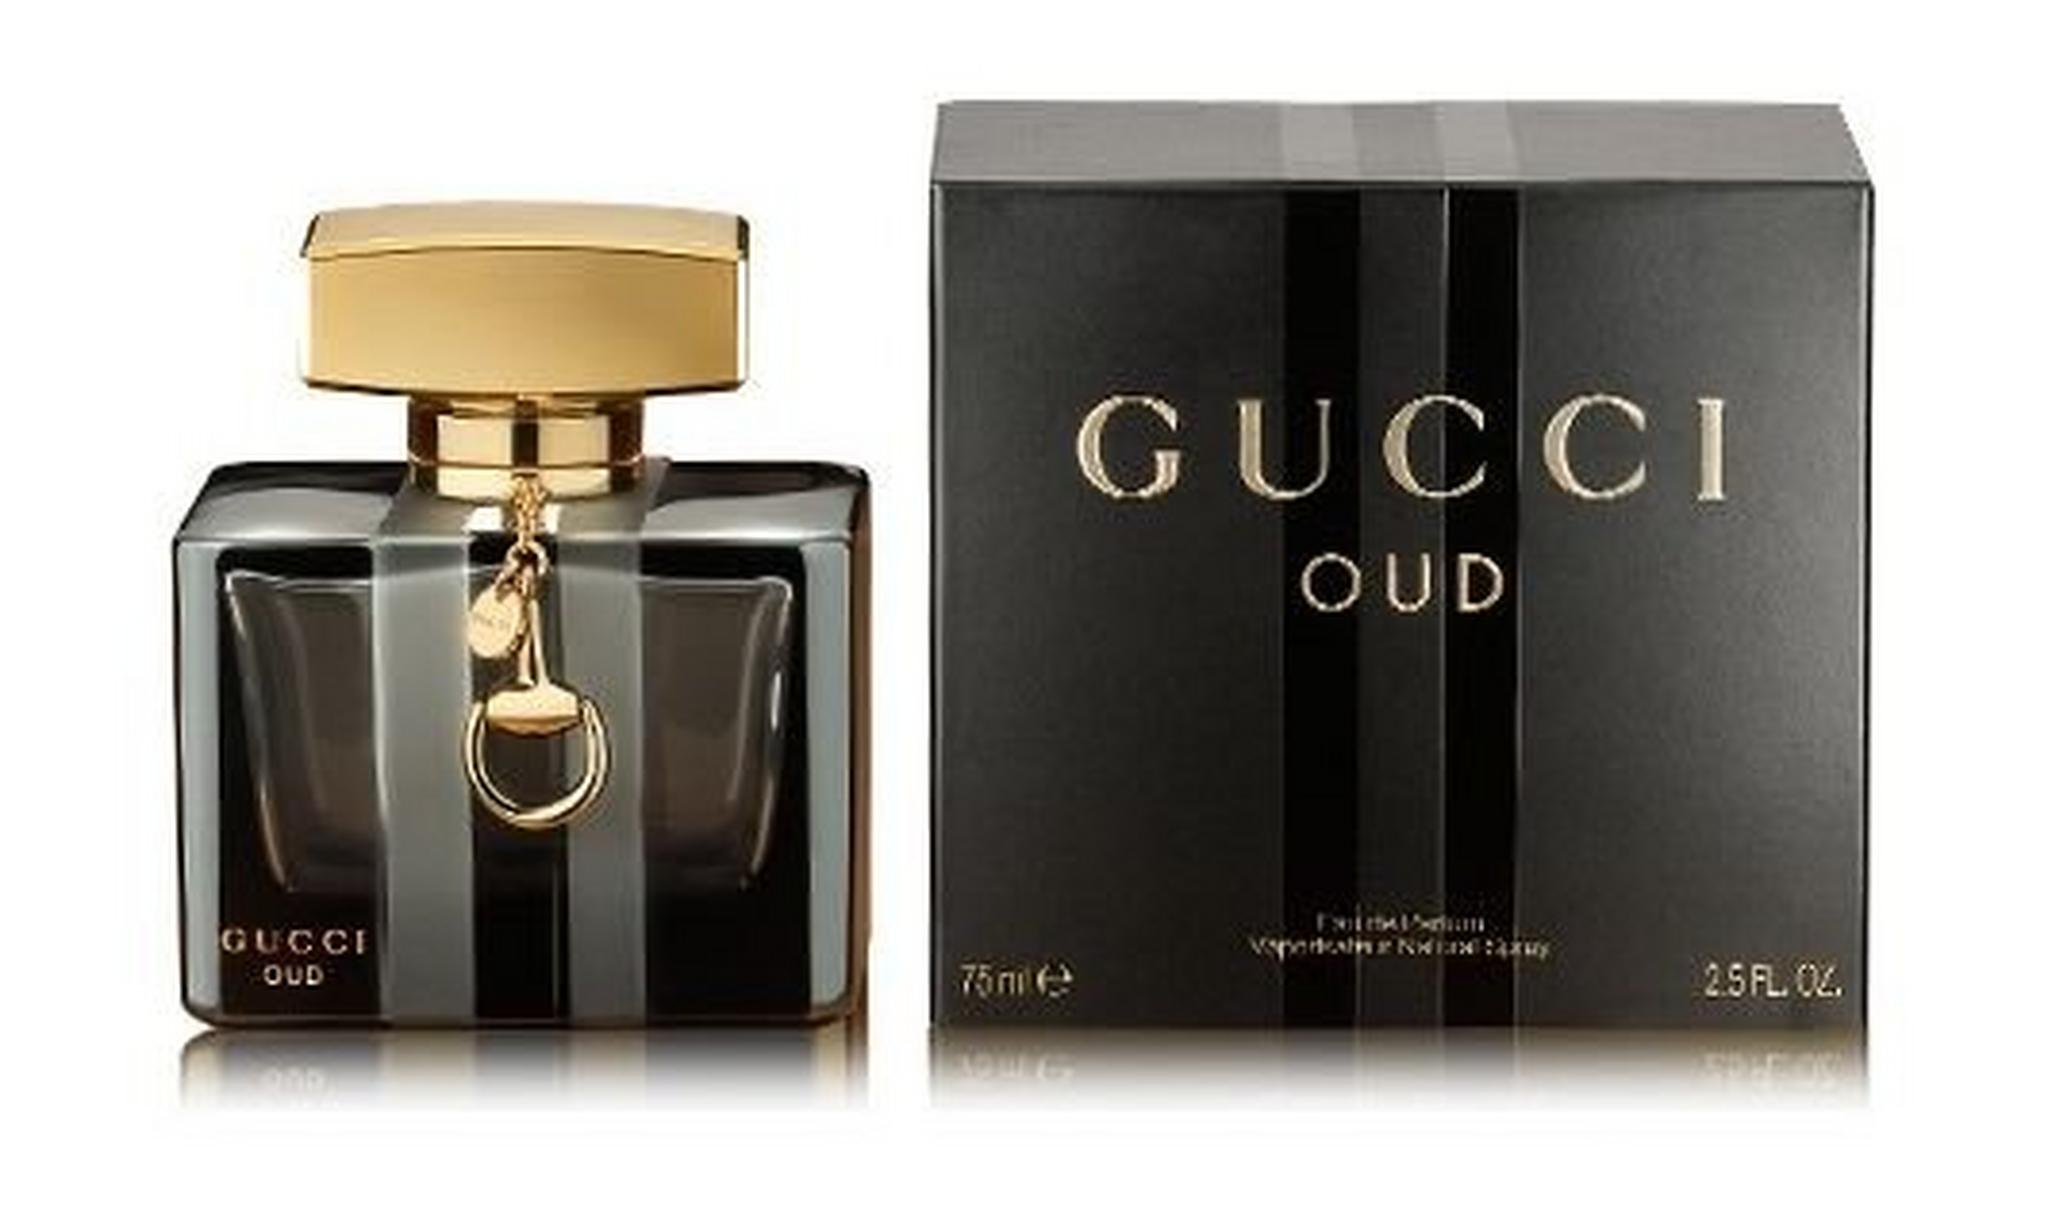 Gucci Oud EDP Perfume for Men and Women 75ml